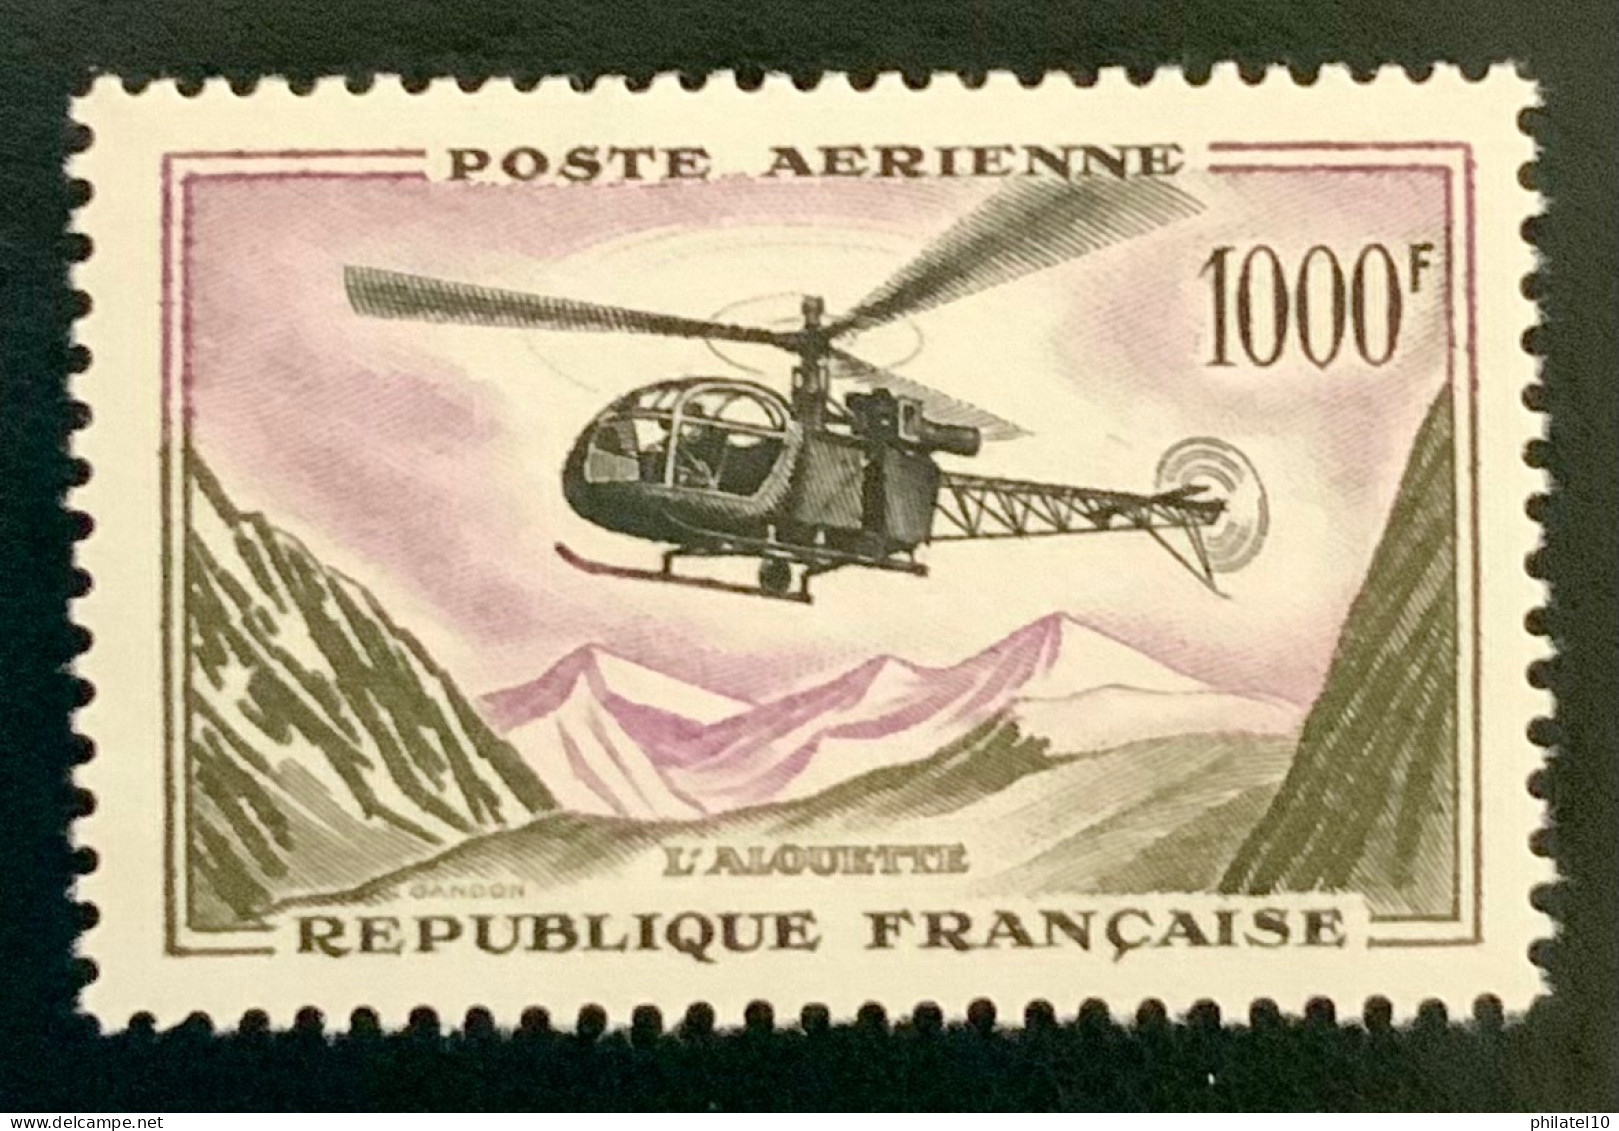 1959 FRANCE N 37 POSTE AERIENNE L’ALOUETTE 1000F - NEUF** - 1927-1959 Mint/hinged